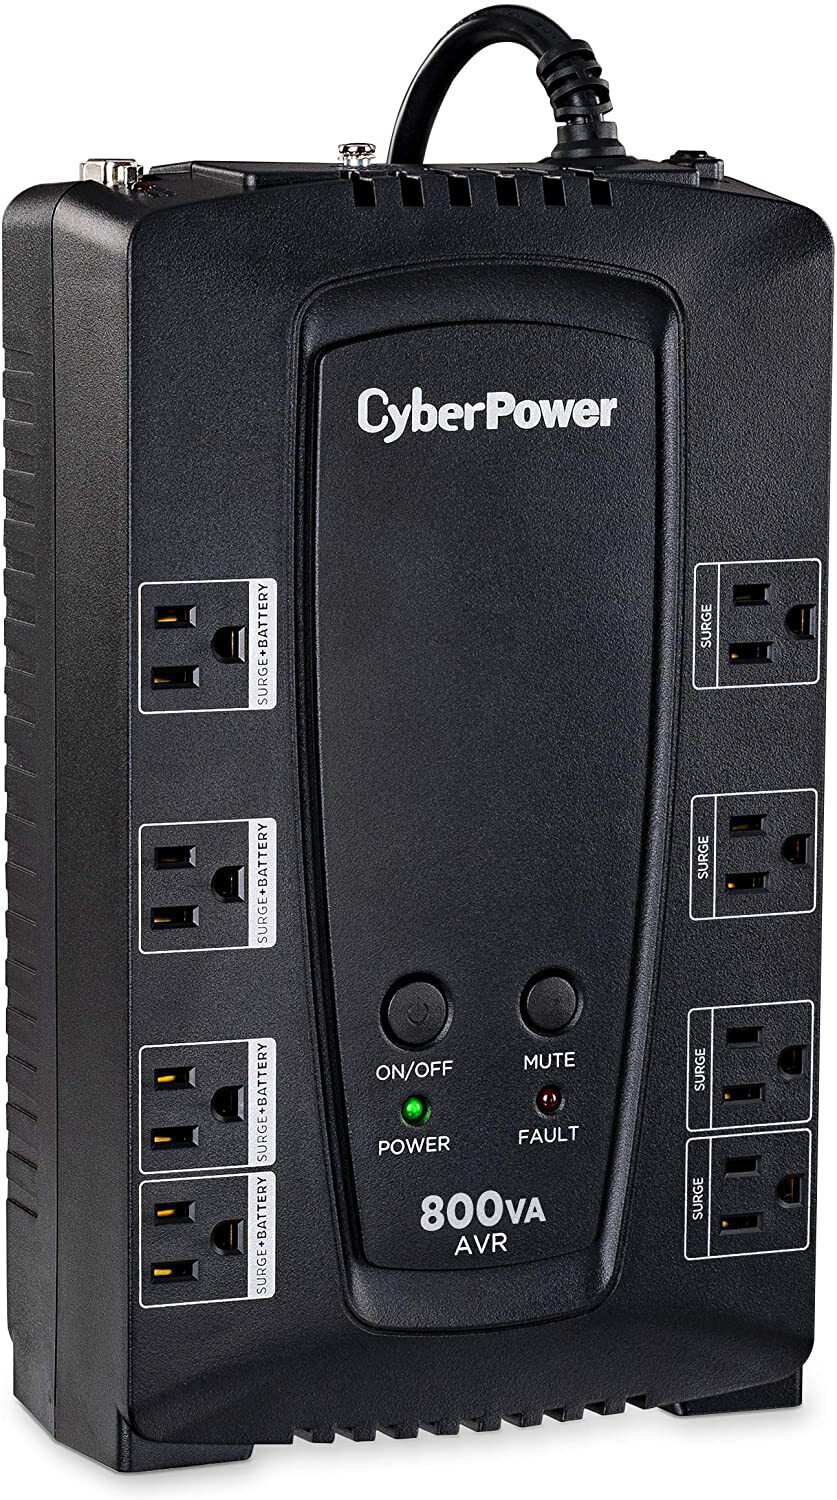 CyberPower Outlets